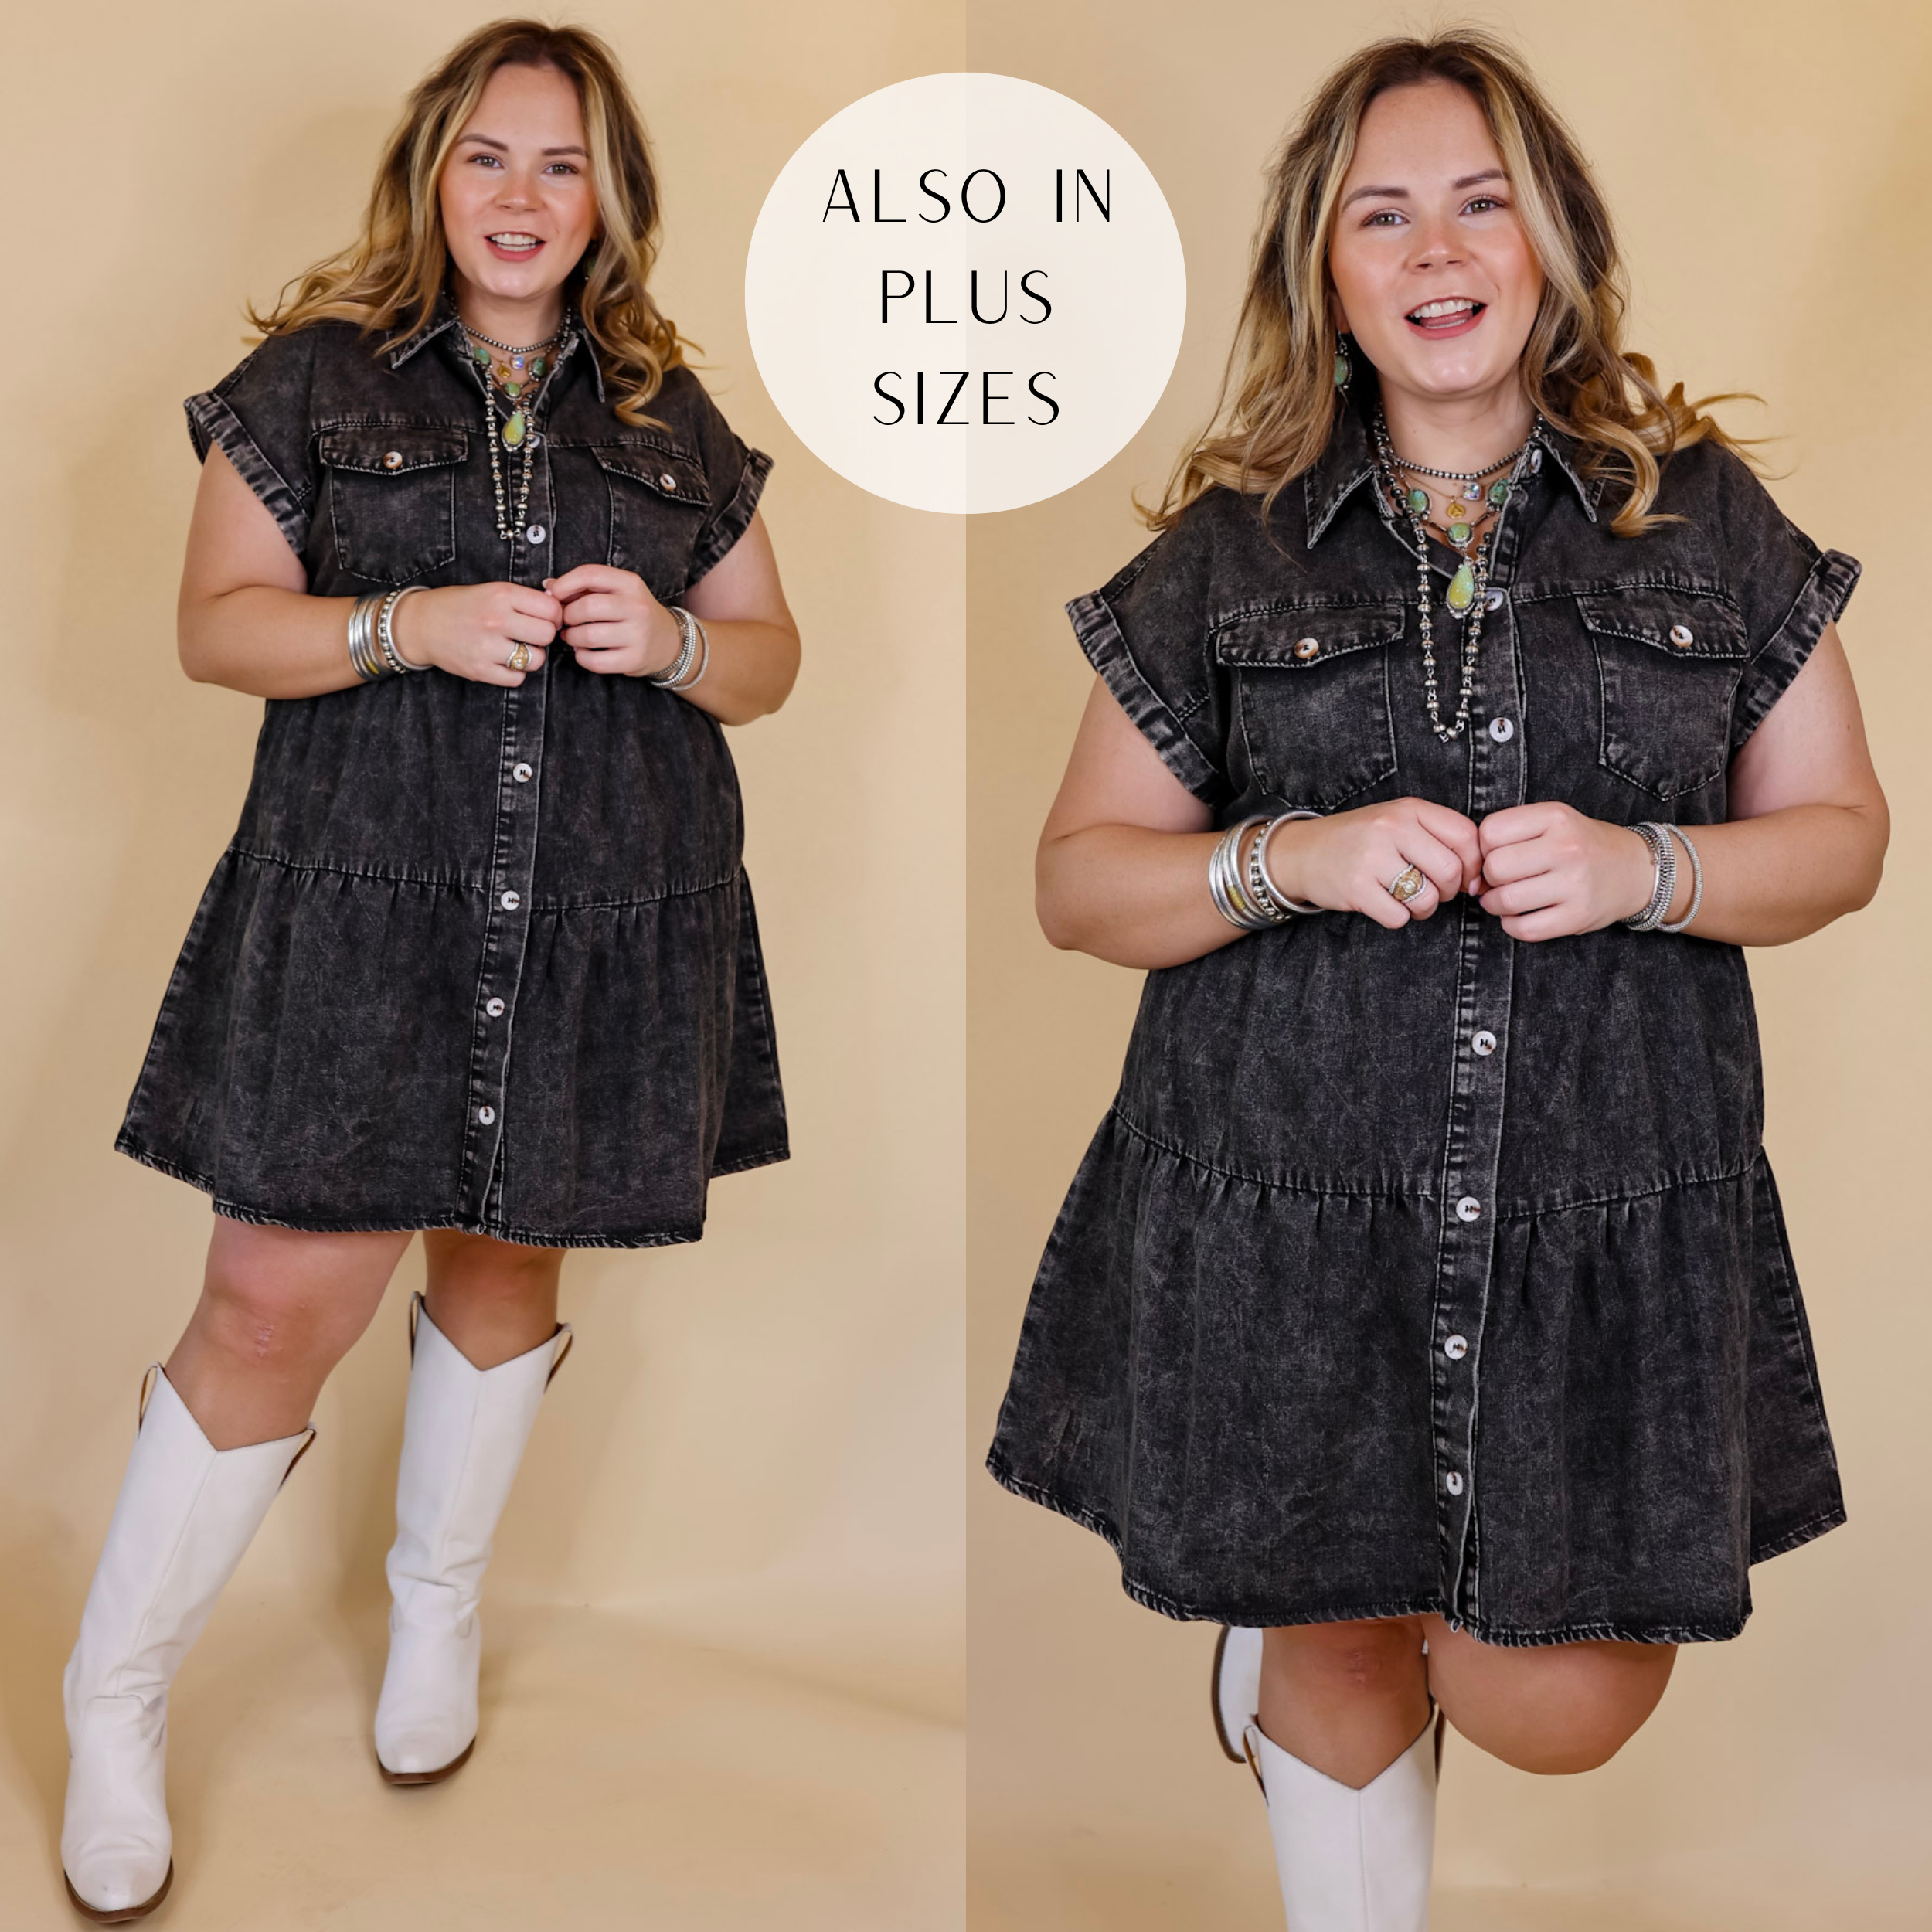 Model has a button down, tiered dress in black. Model has this dress paired with tall, white boots and Navajo jewelry. Background is solid tan.  